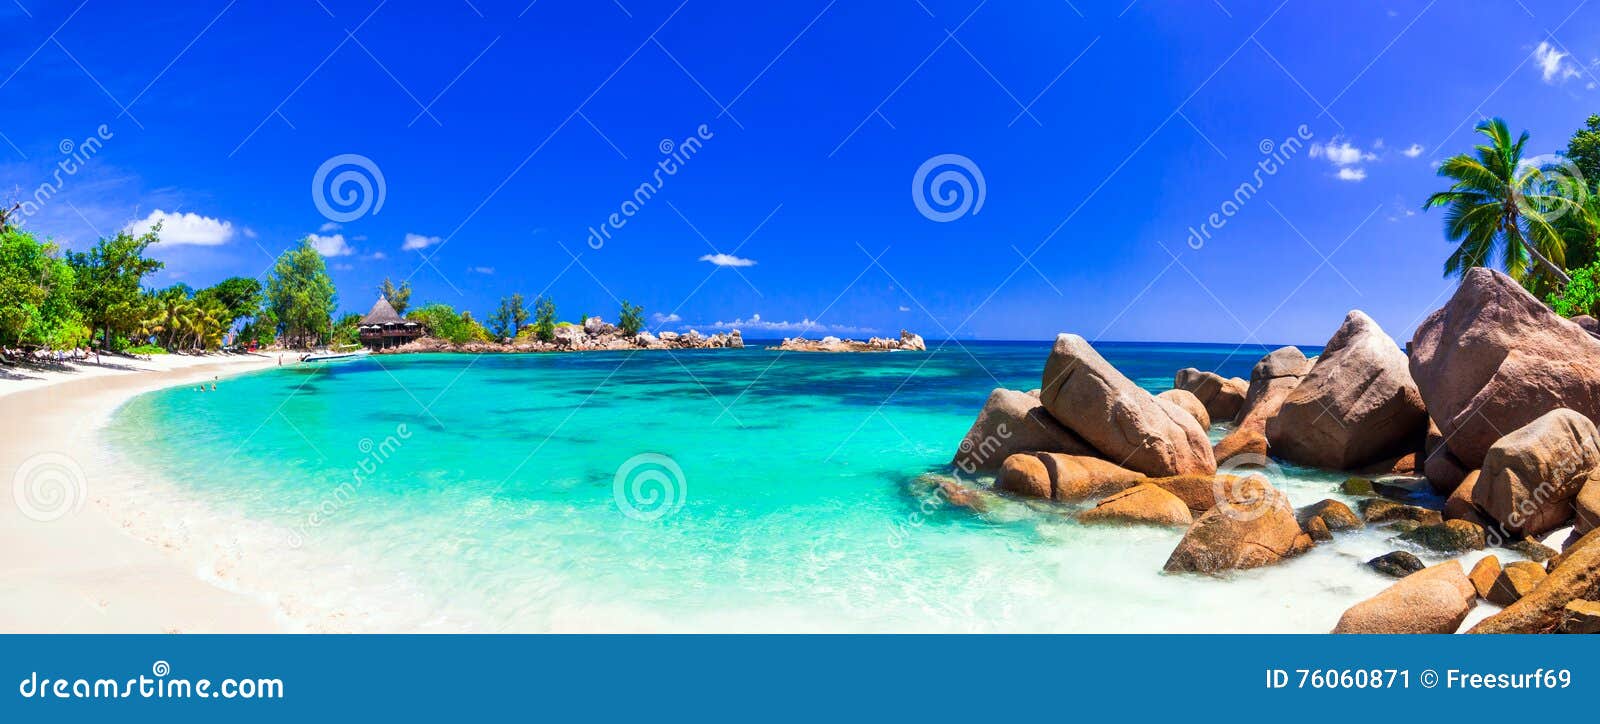 amazing tropical holidays in paradise beaches of seychelles,pras